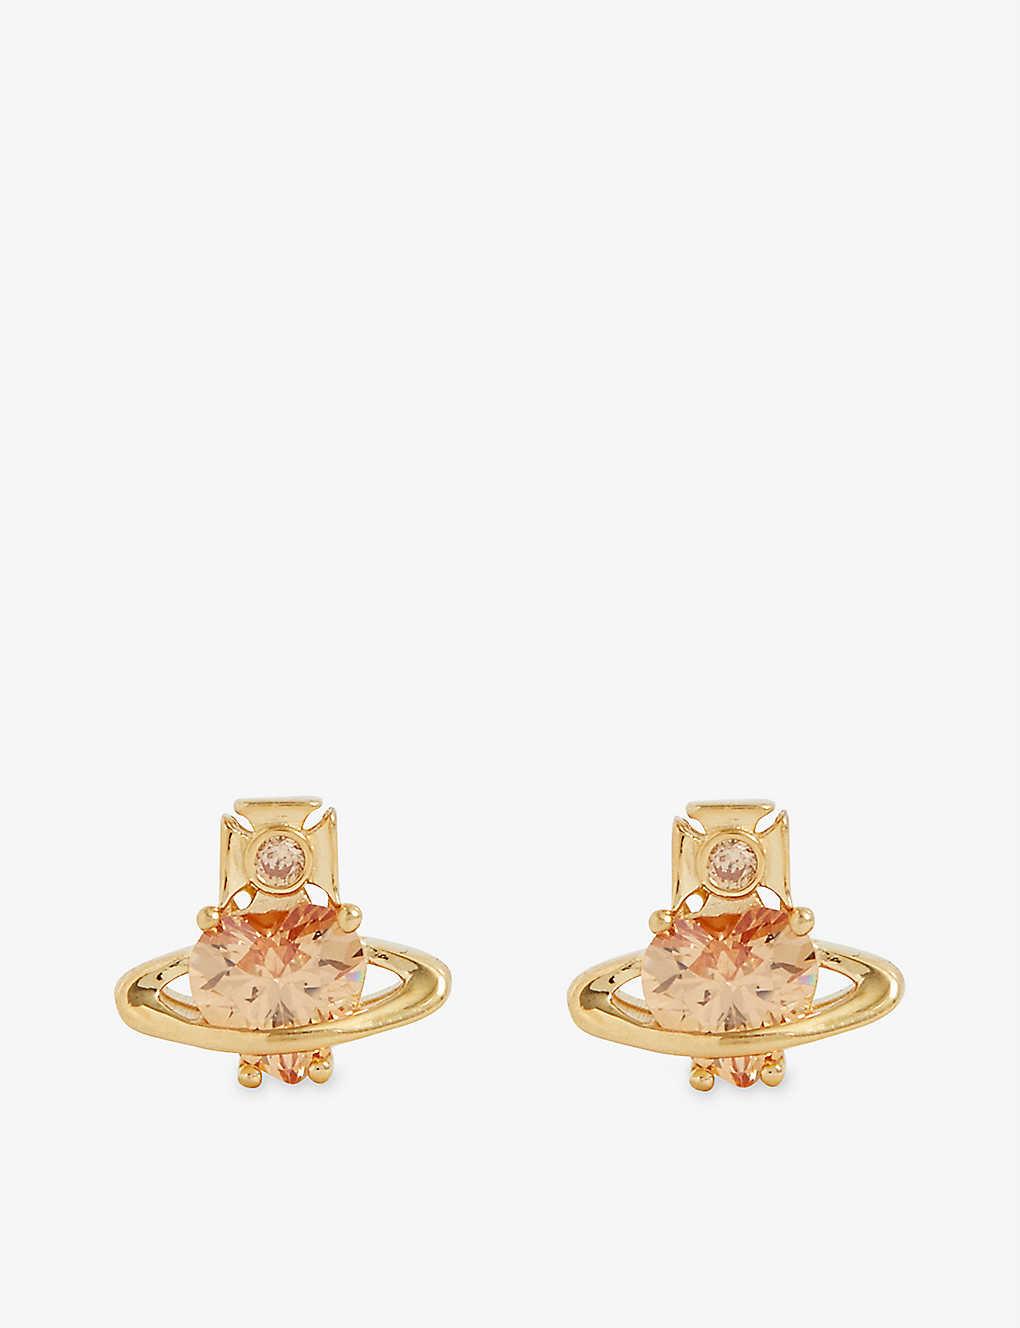 Vivienne Westwood Leonor Brass And Crystal Stud Earrings in Natural | Lyst